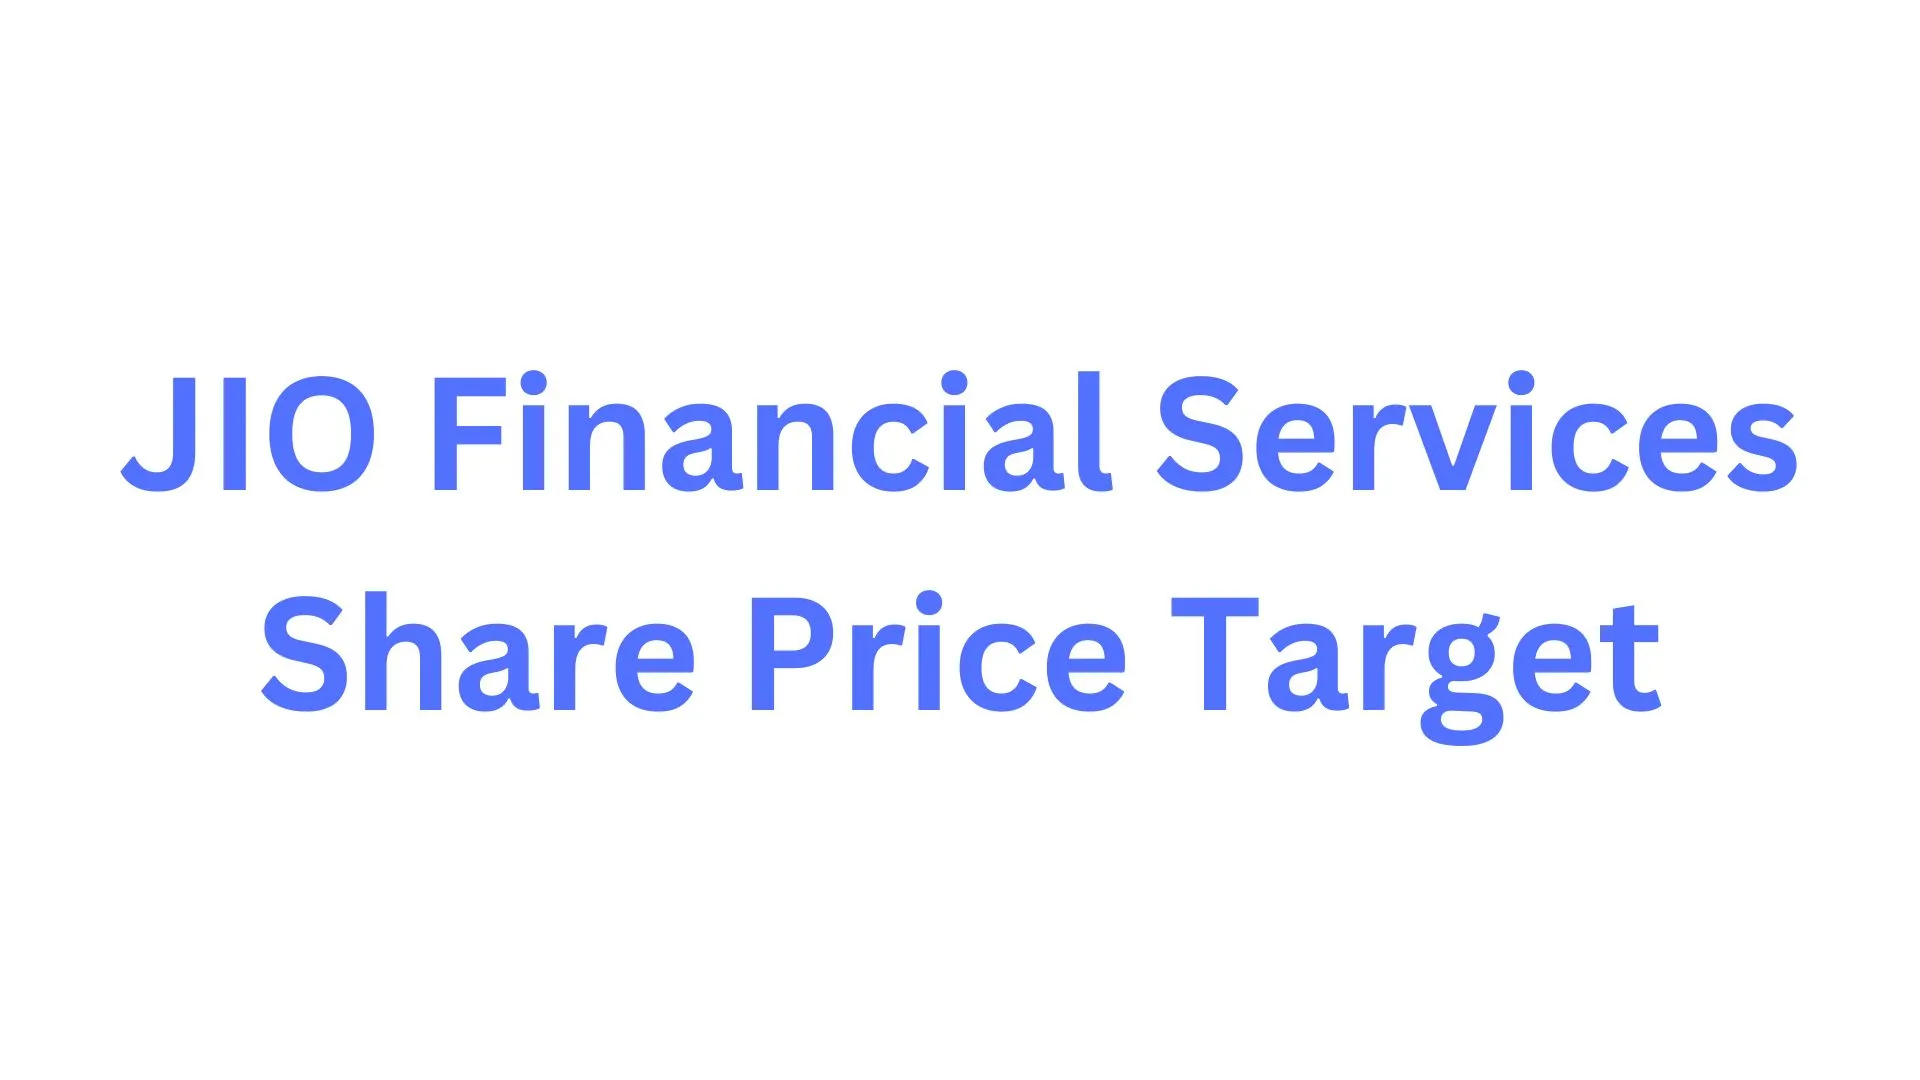 JIO Financial Services Share Price Target